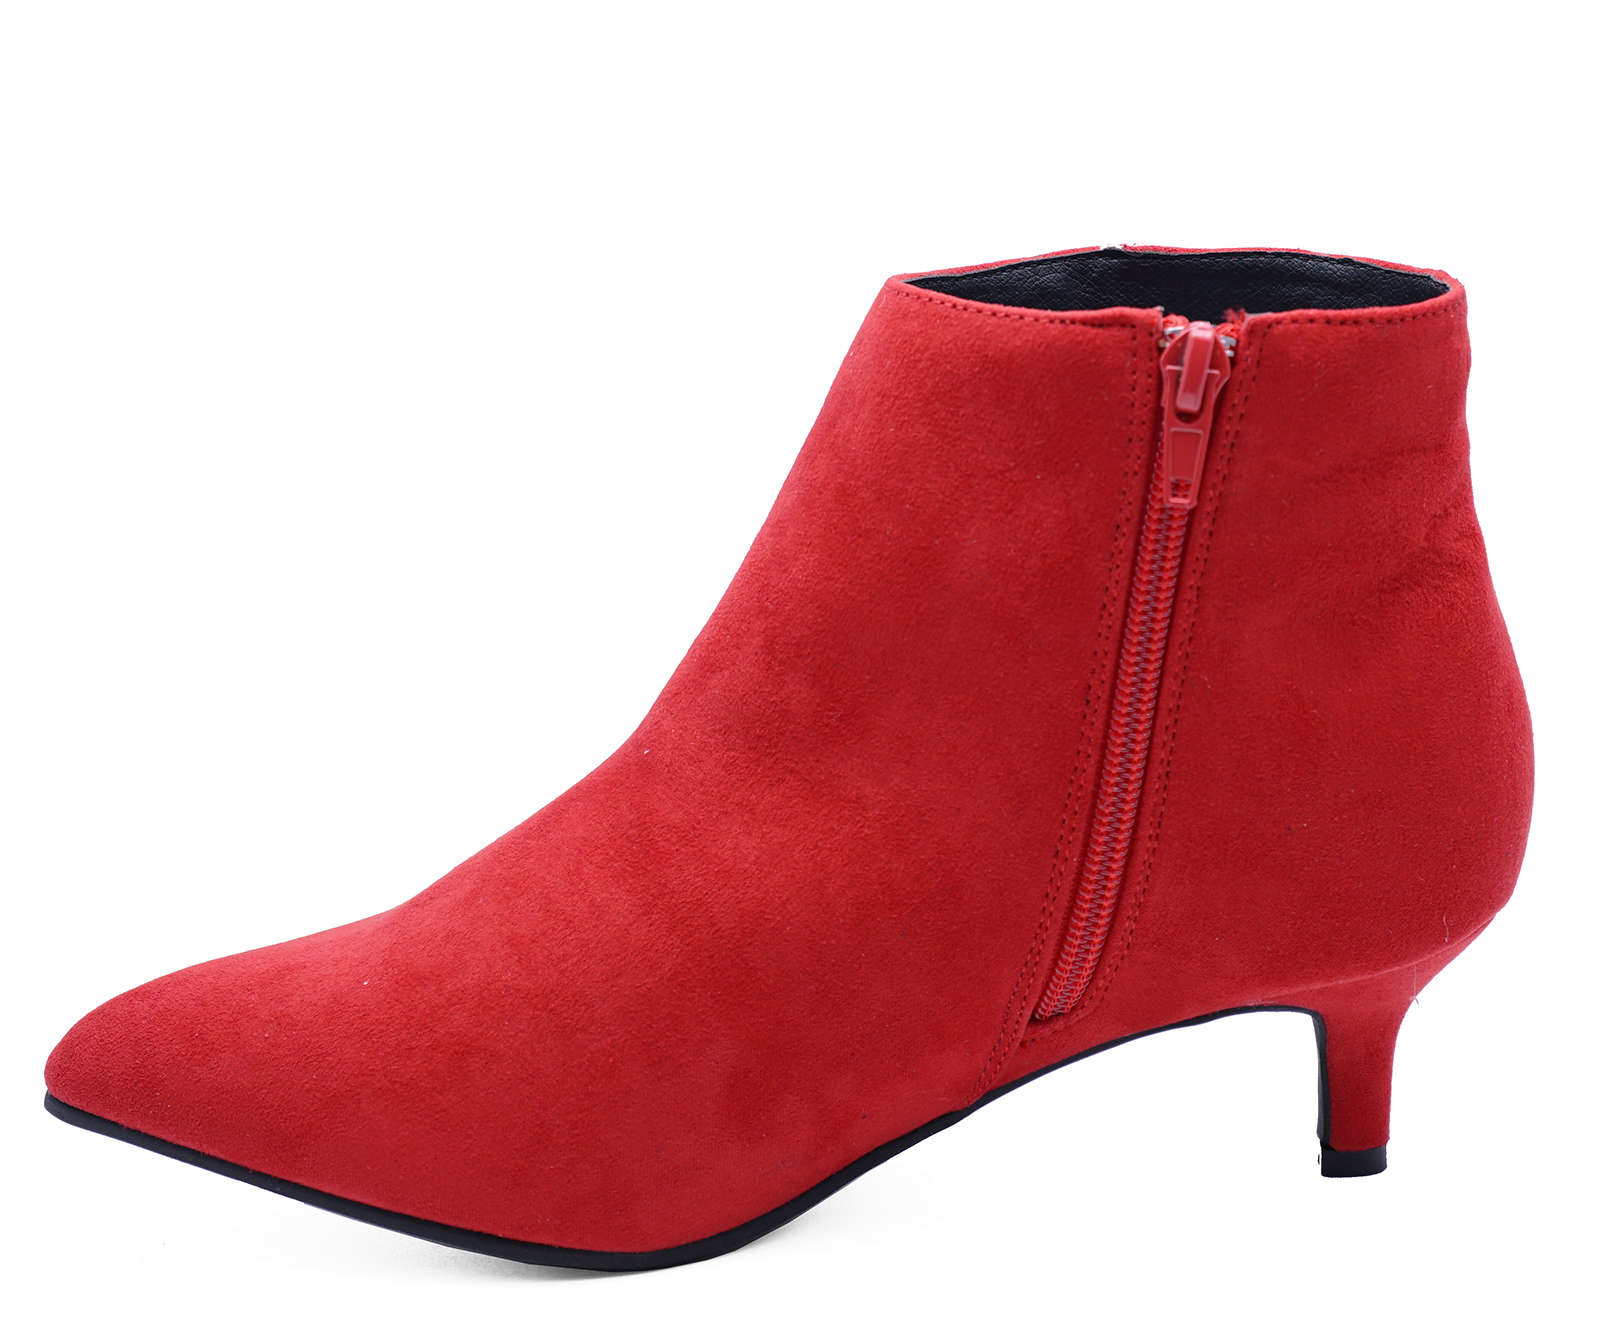 LADIES RED ZIP-UP KITTEN LOW HEEL FAUX-SUEDE ANKLE BOOTS WORK SHOES